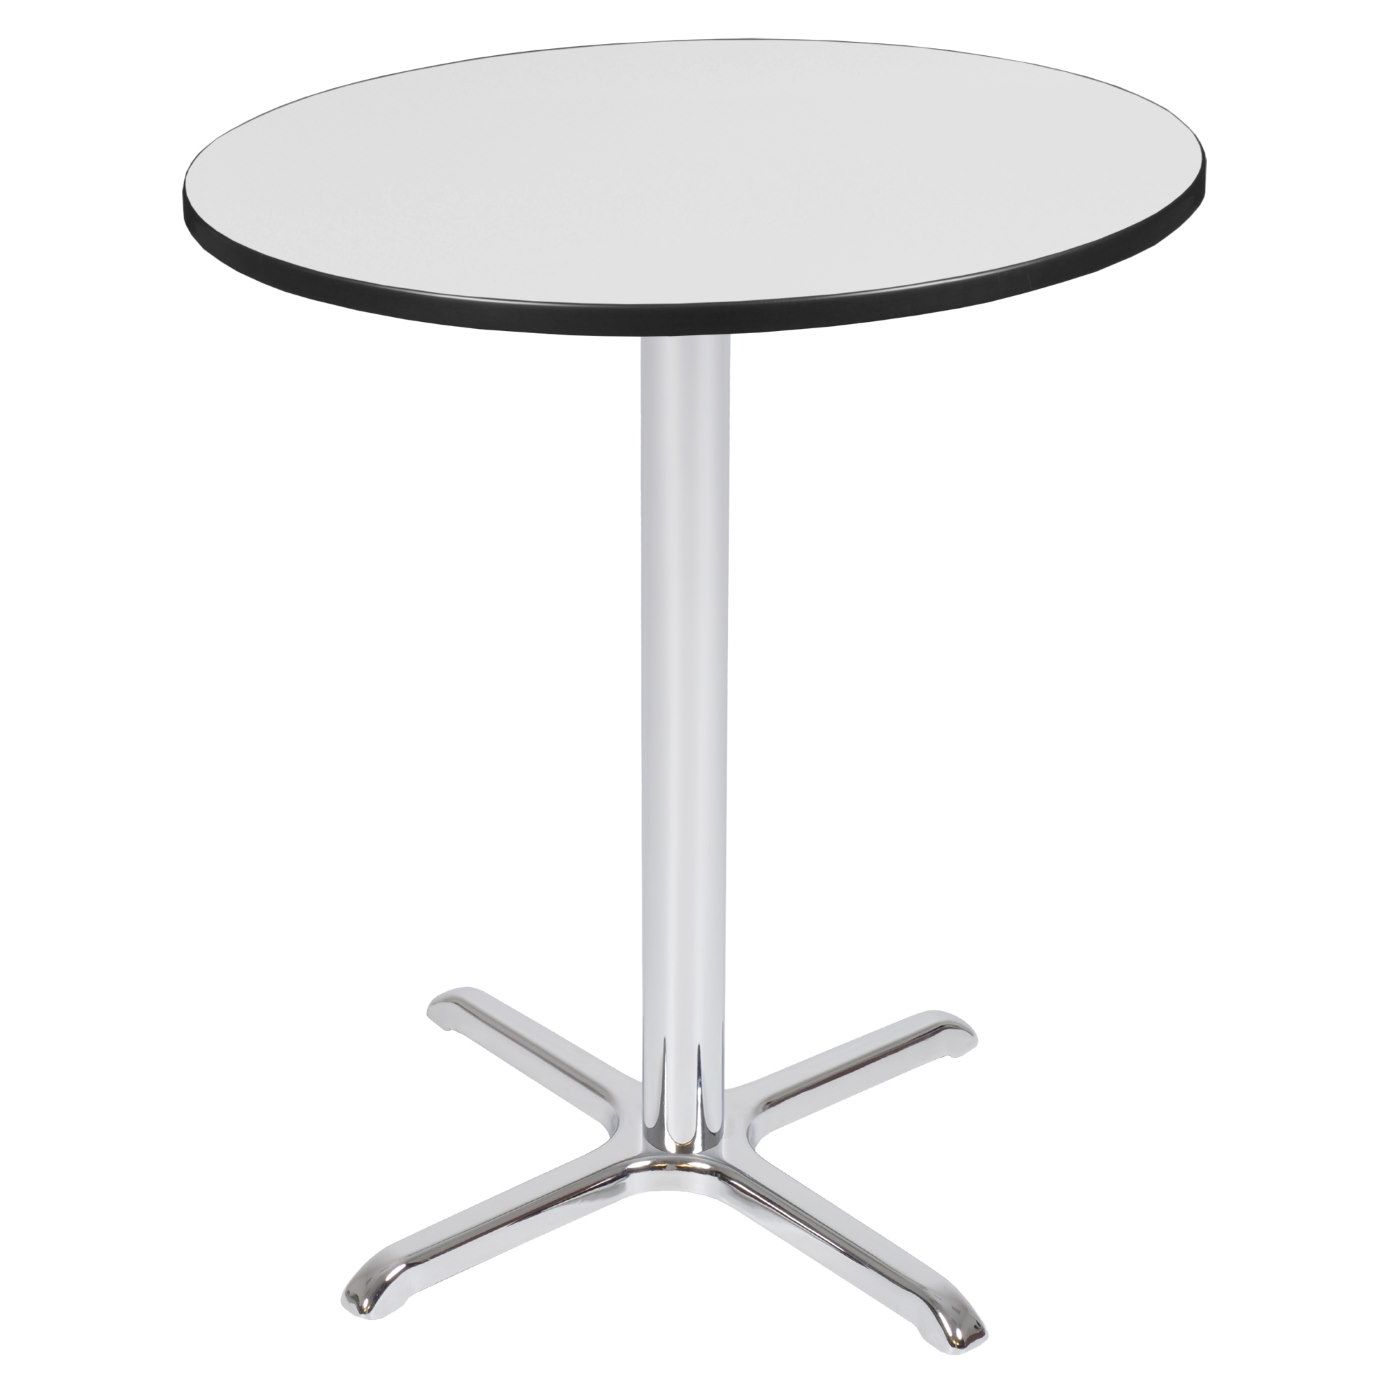 Tcb36rndwhcm | Regency Cain Cafe High 36" Round X Base Table  White Throughout Regency Cain Steel Coffee Tables (View 3 of 20)